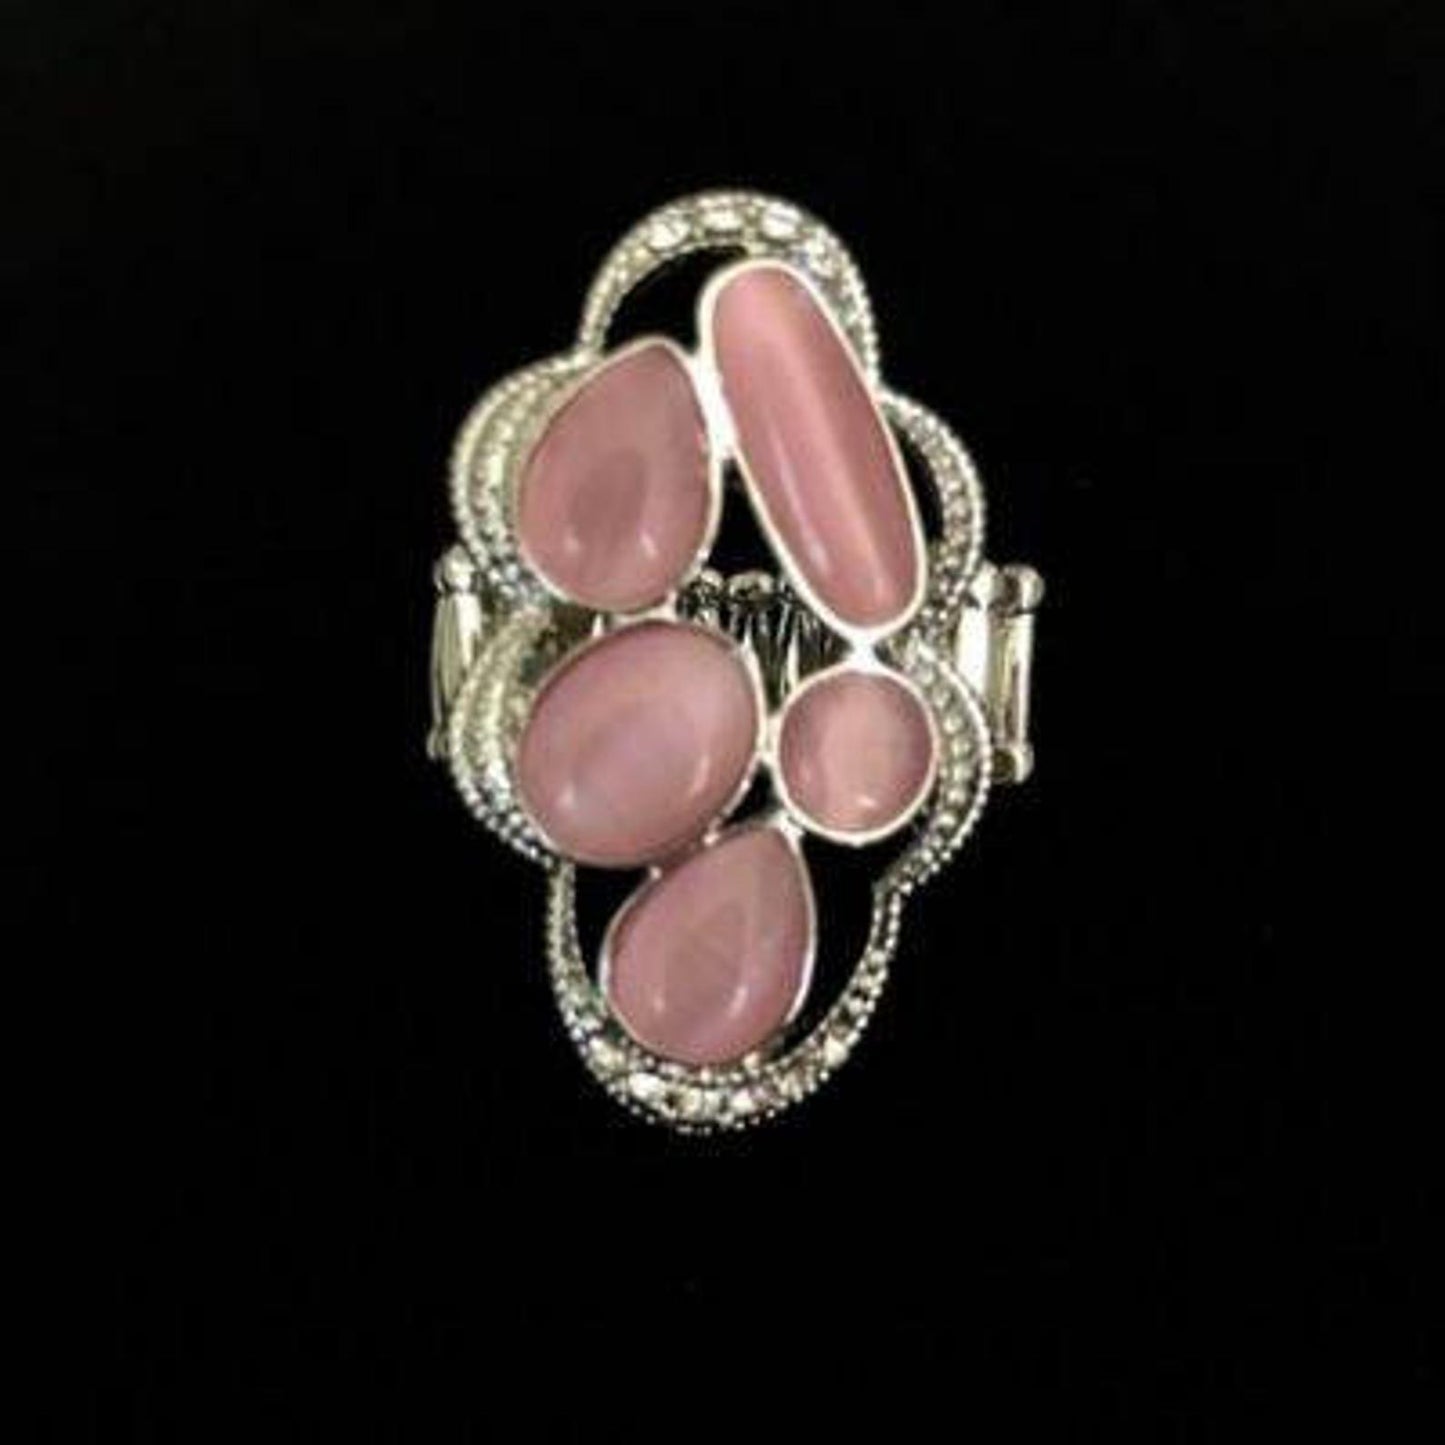 Cherished Collection Ring - Pink